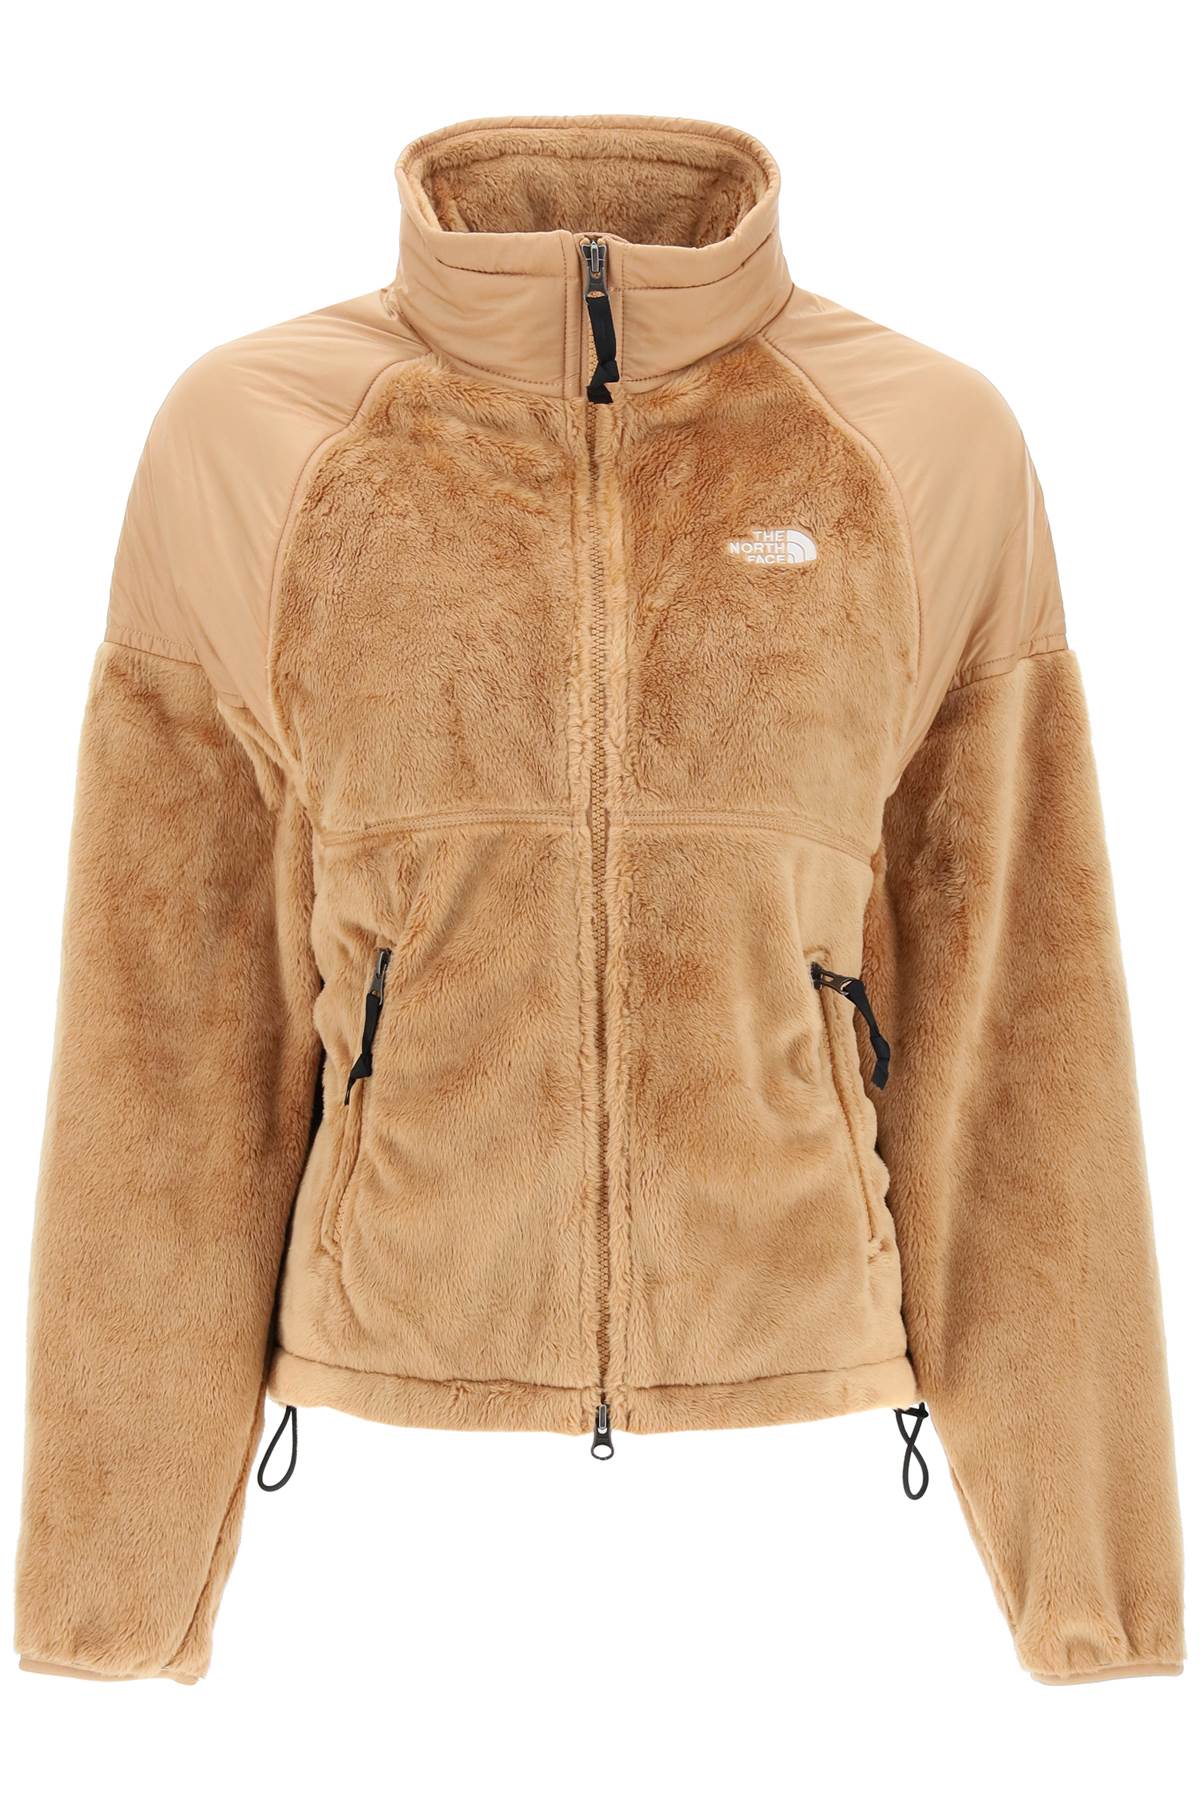 The North Face Versa Velour Jacket In Recycled Fleece And Ripstop - 0ALMOND BUTTER (Beige) - female - Size: Large